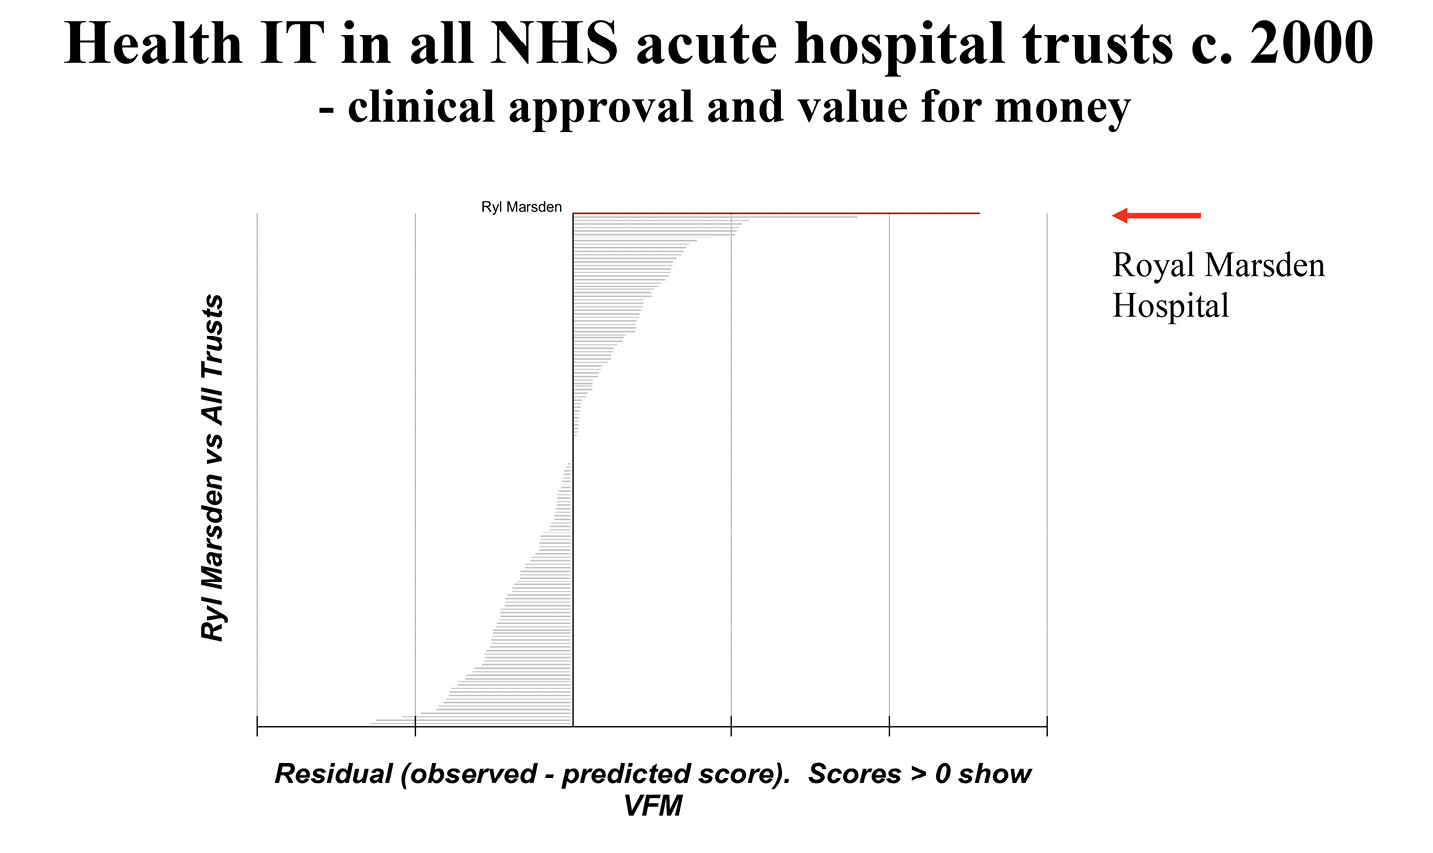 A graph entitled: Health IT in all NHS acute hospital trusts c. 2000 - clinical approval and value for money. The vertical axis is named ‘Ryl Marsden vs All Trusts’ and the horizontal axis is named ‘Residual (observed - predicted score). Scores < 0 show VFM’.